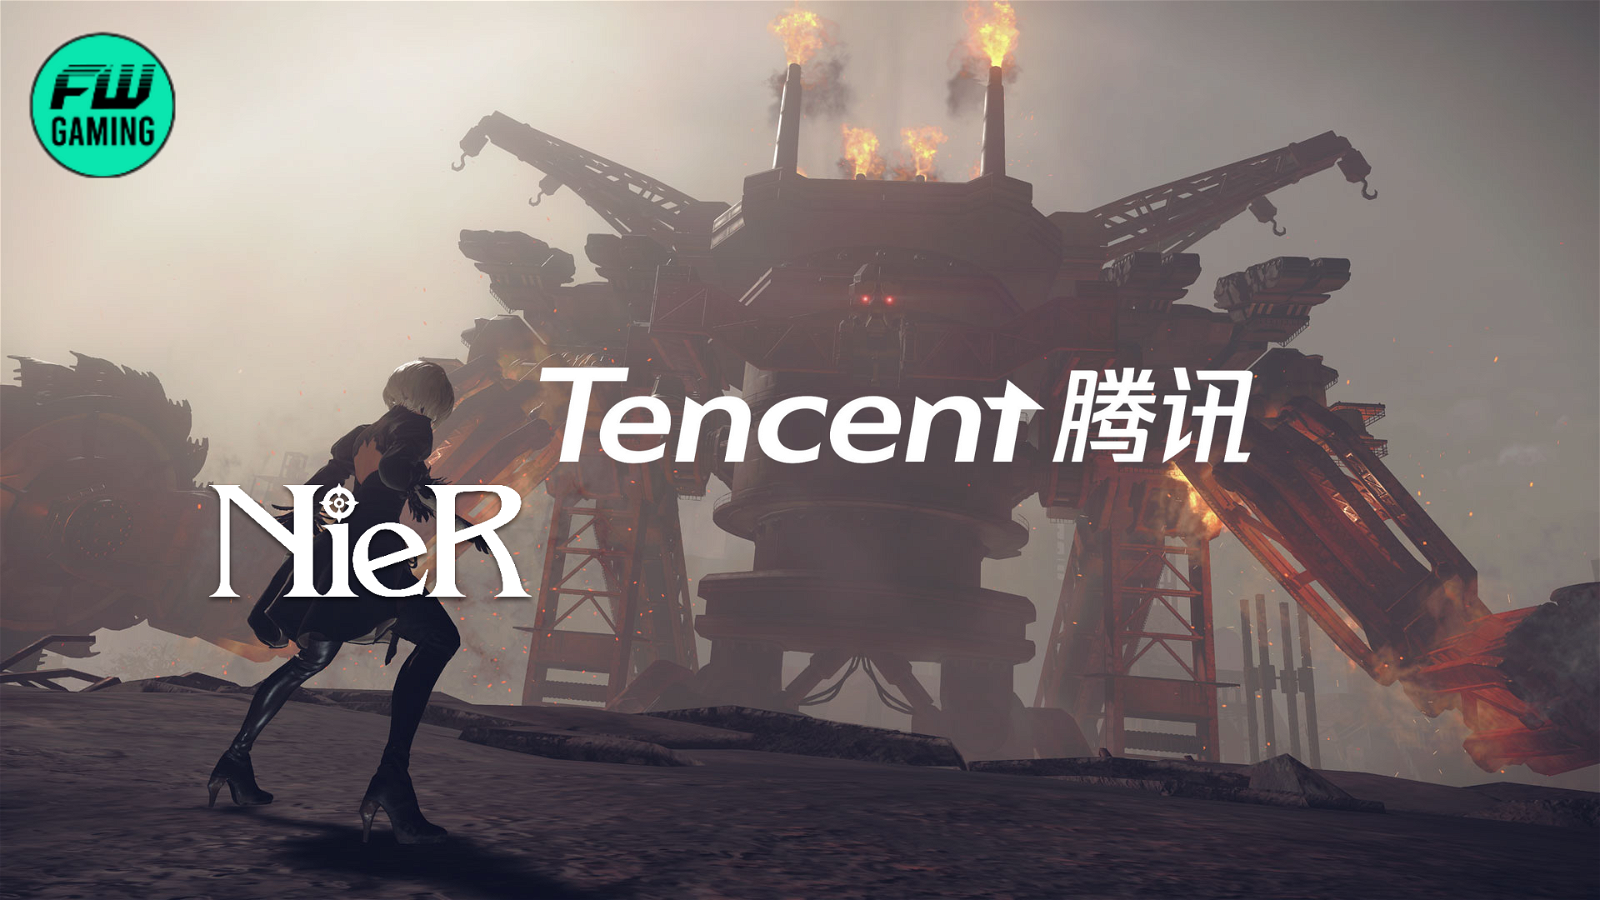 Square Enix’s New Nier Game Has Reportedly Been Cancelled by Tencent